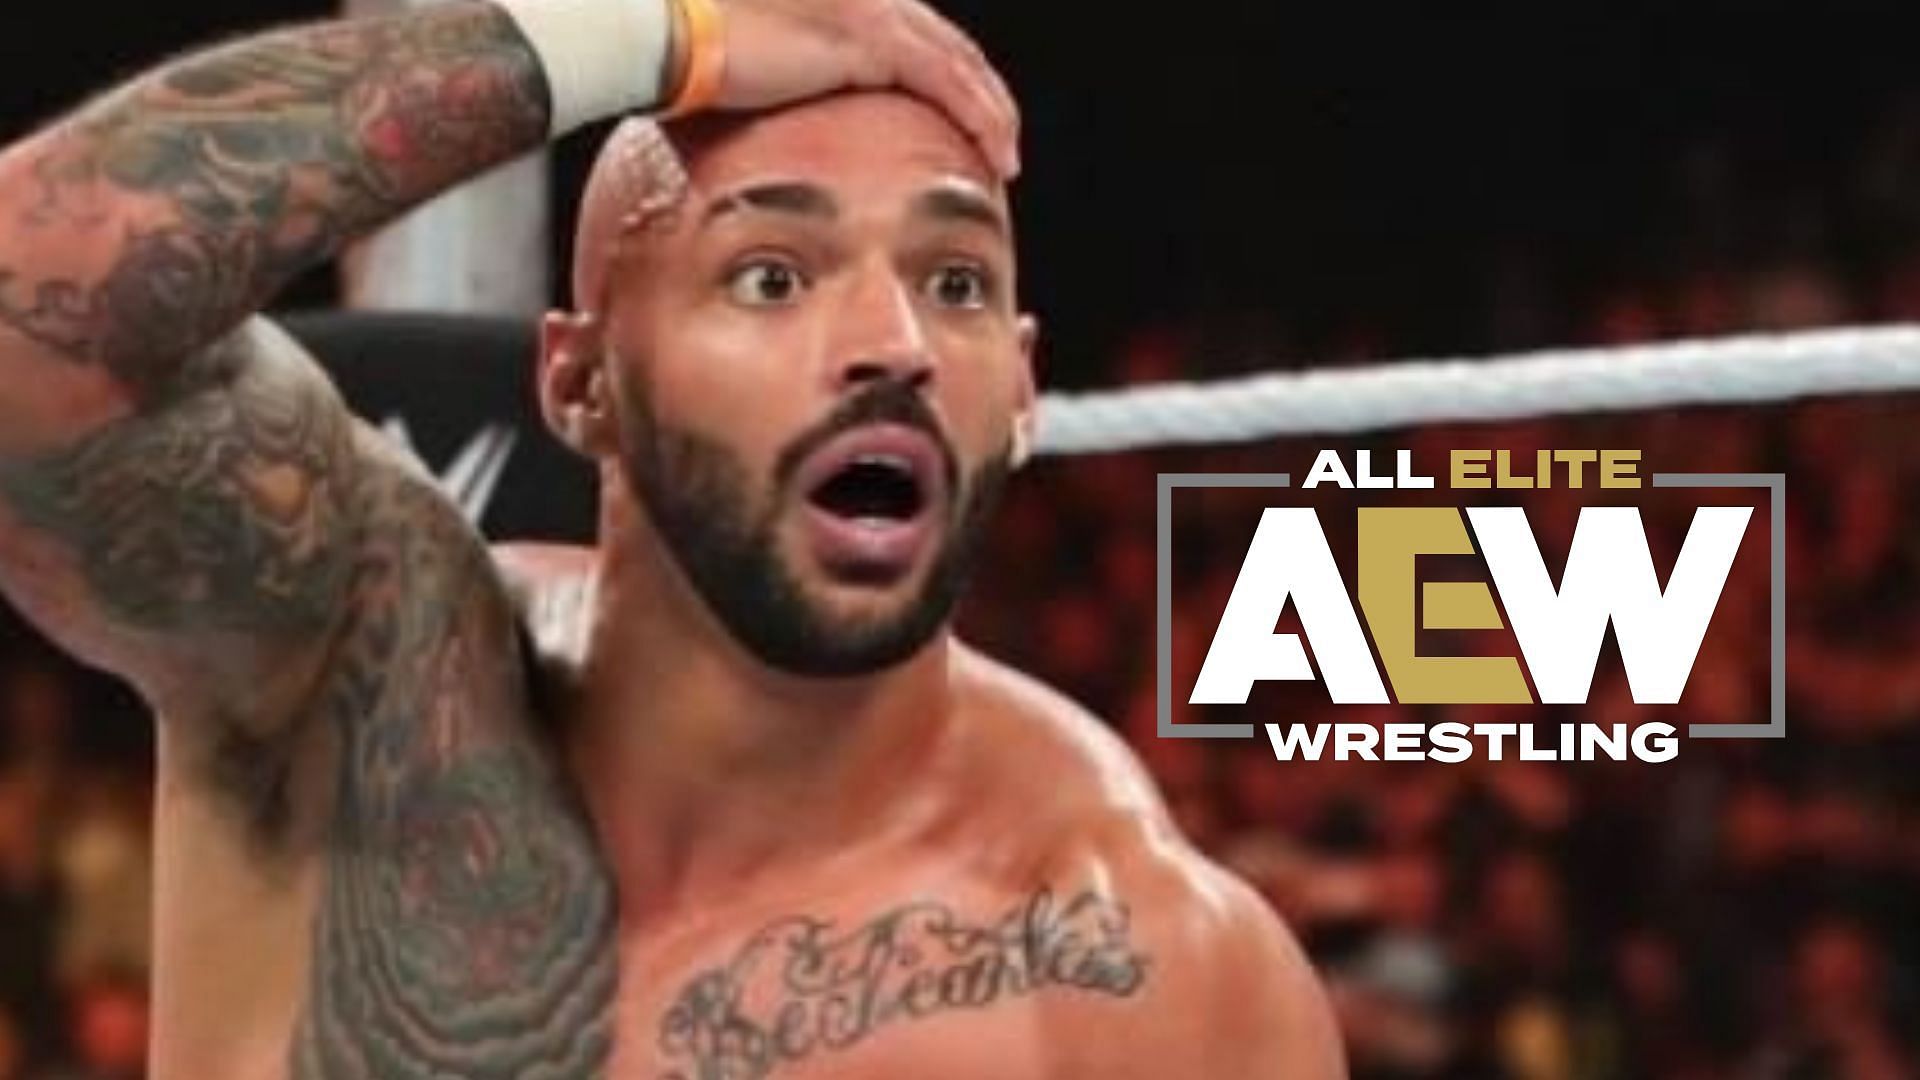 Ricochet is looking forward to a match in AEW